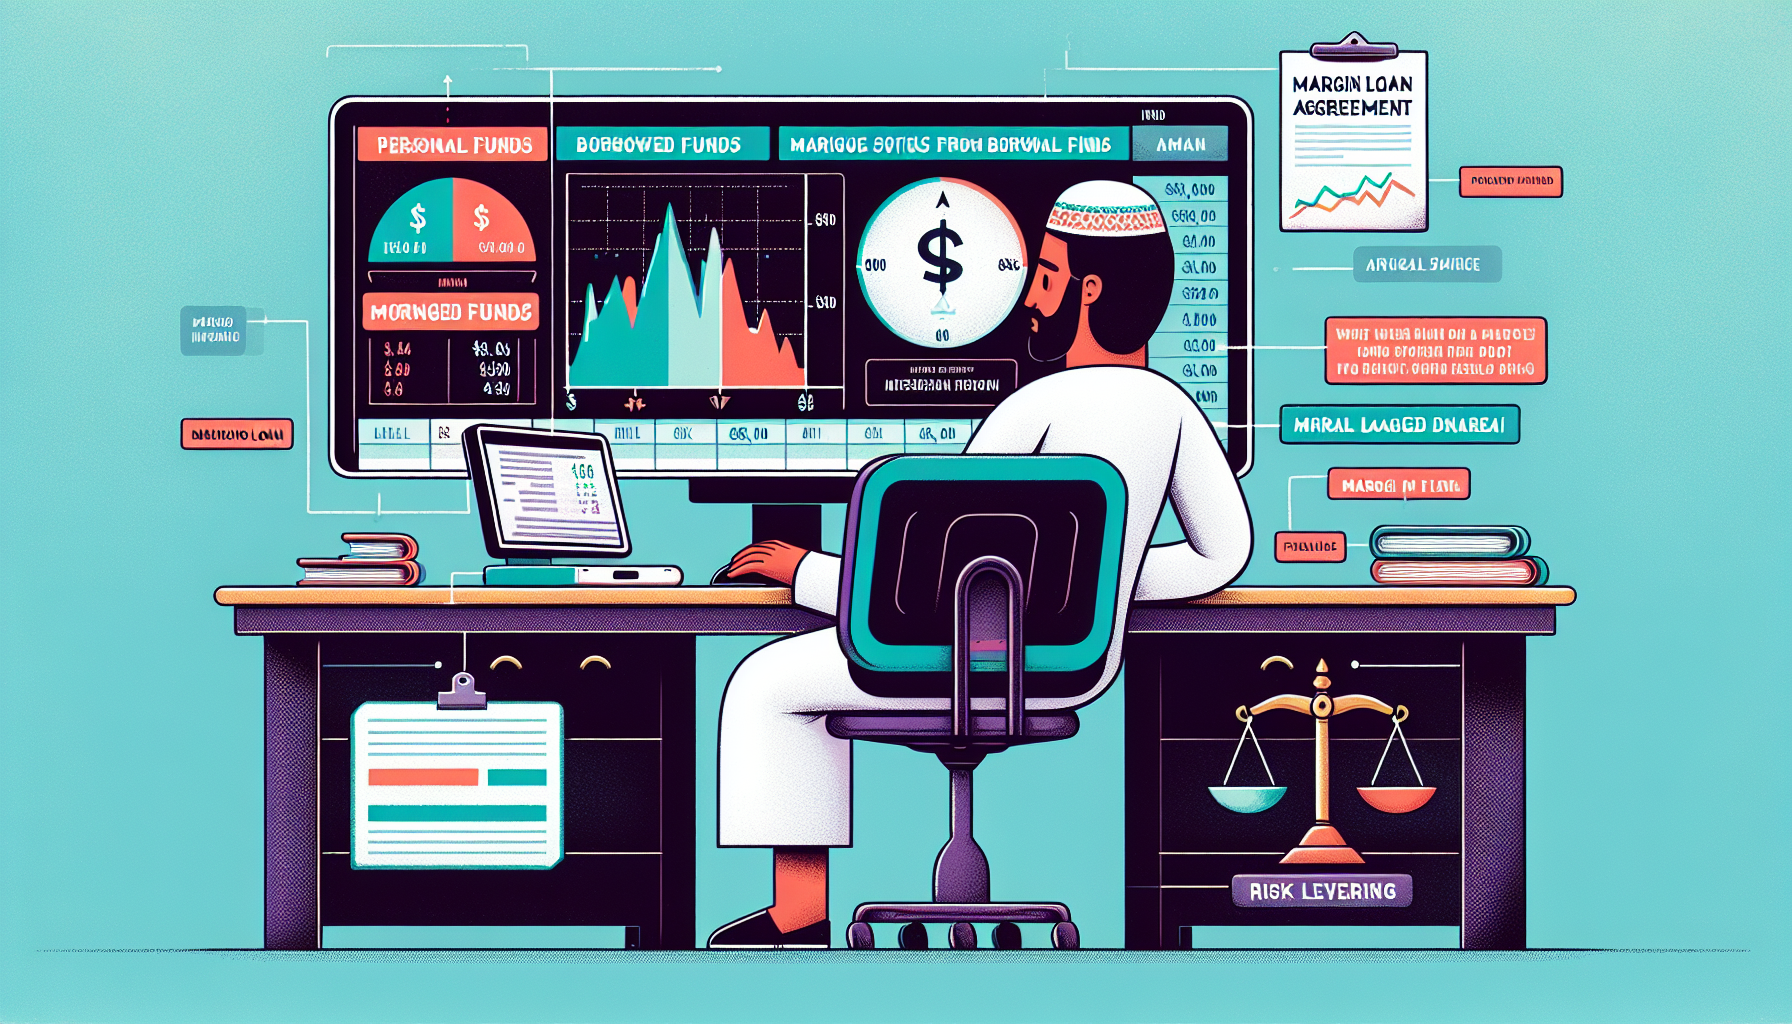 Create an image that visually explains the concept of buying stocks on margin for beginners. Depict a novice investor sitting at a desk with a computer screen displaying a stock trading platform. Include elements like a margin loan document, a pie chart showing the division between investor's funds and borrowed funds, and a balance scale to symbolize risk and leverage. Use a clean, informative, and approachable style with clear labels and graphics to highlight key points.